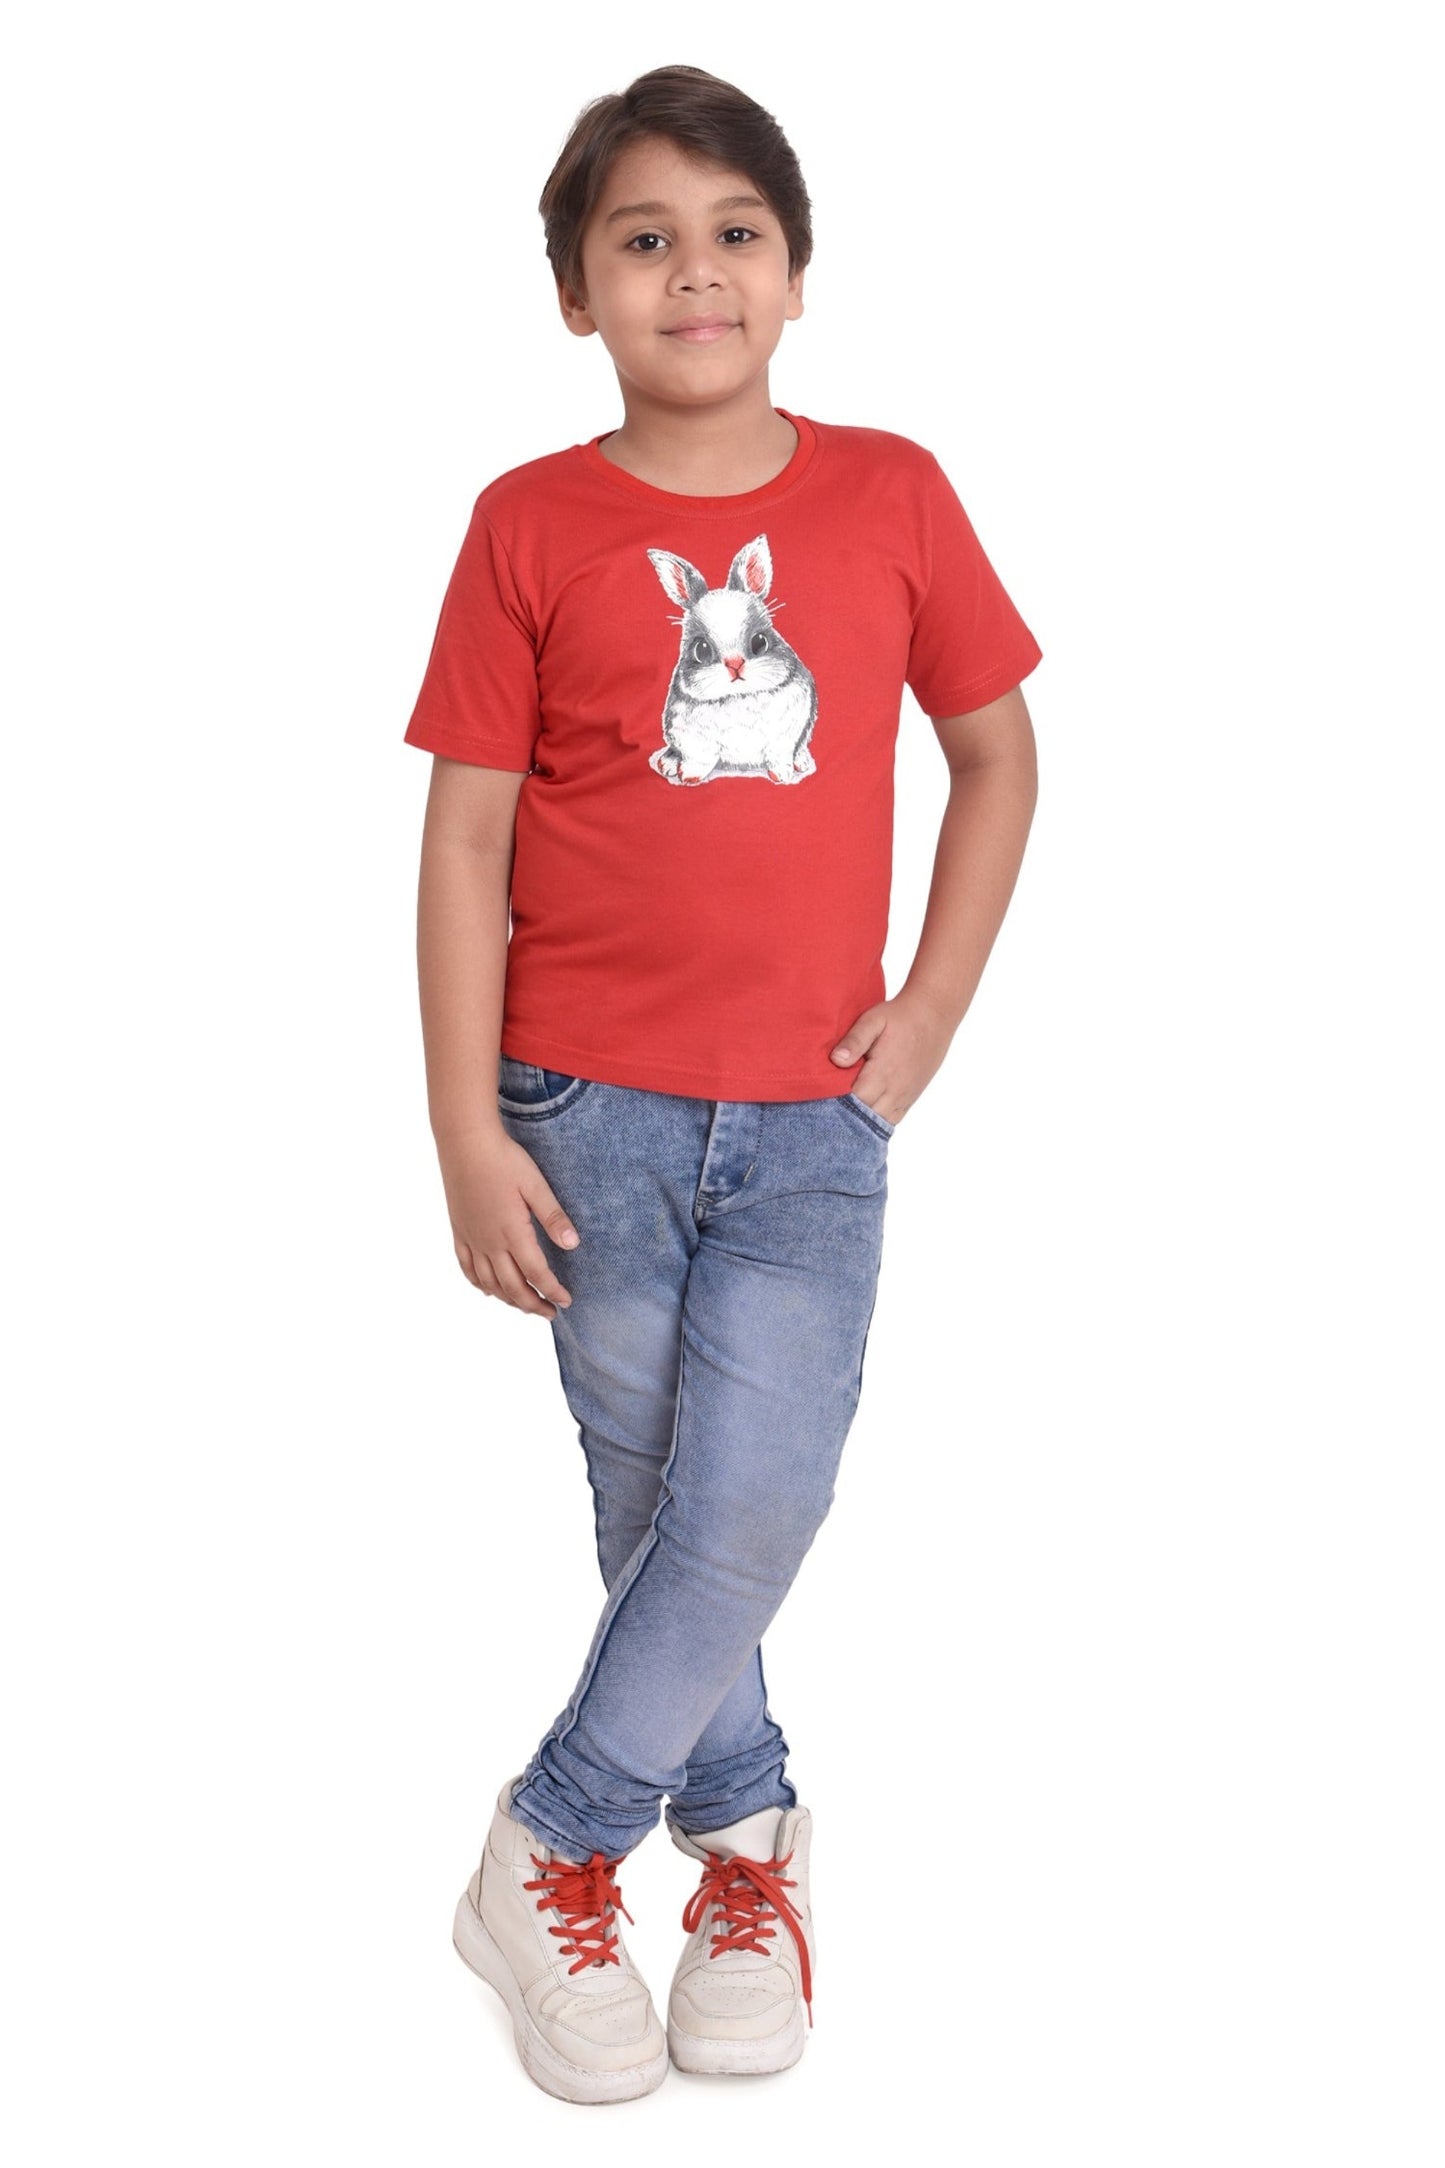 Boys & Girls Round Neck Cotton T-shirt with  BUNNY RABBIT print, front view